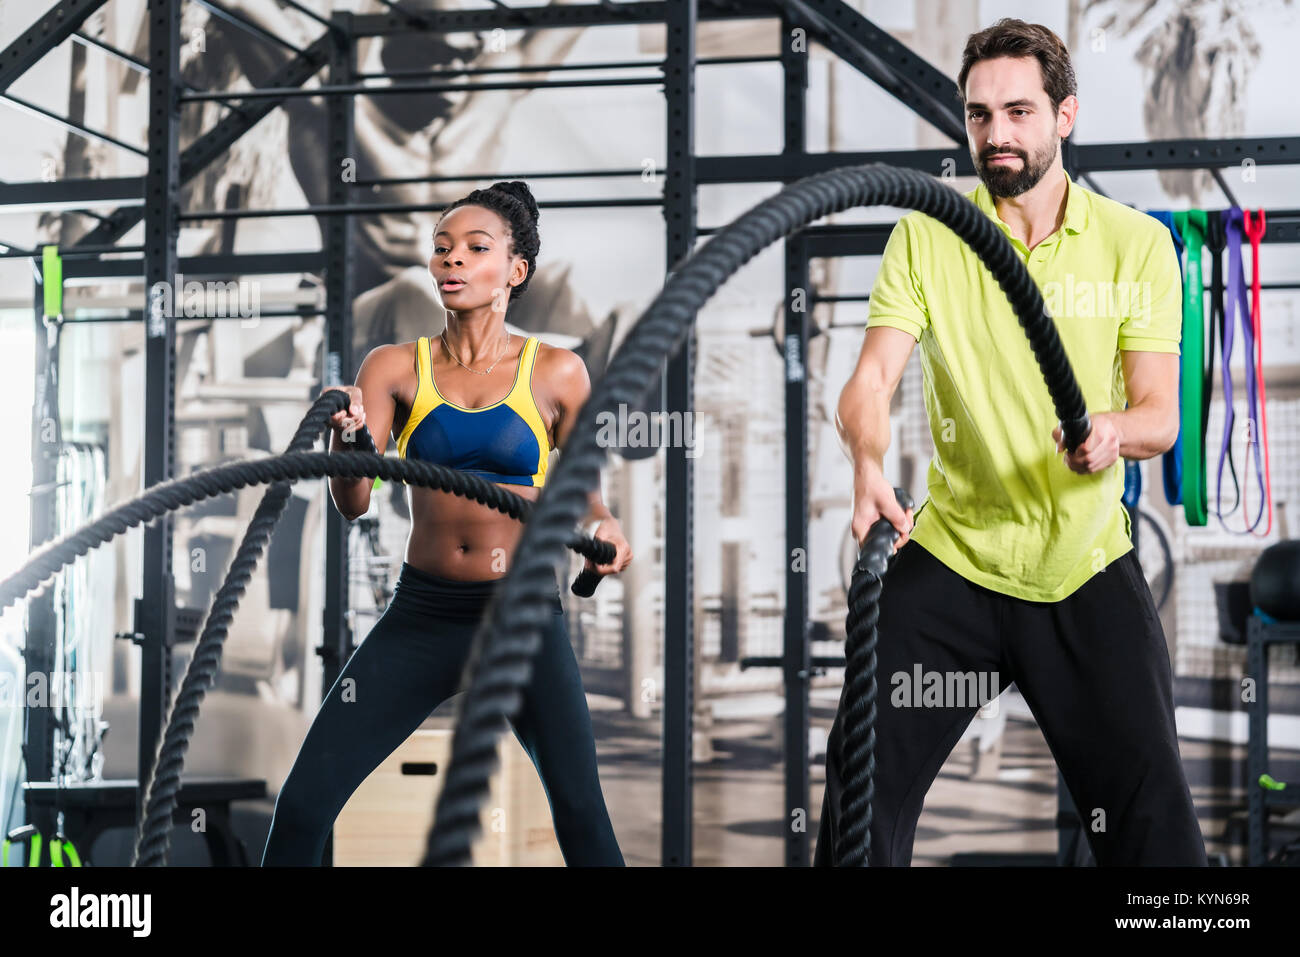 Functional training with battle rope in crossfit gym Stock Photo - Alamy